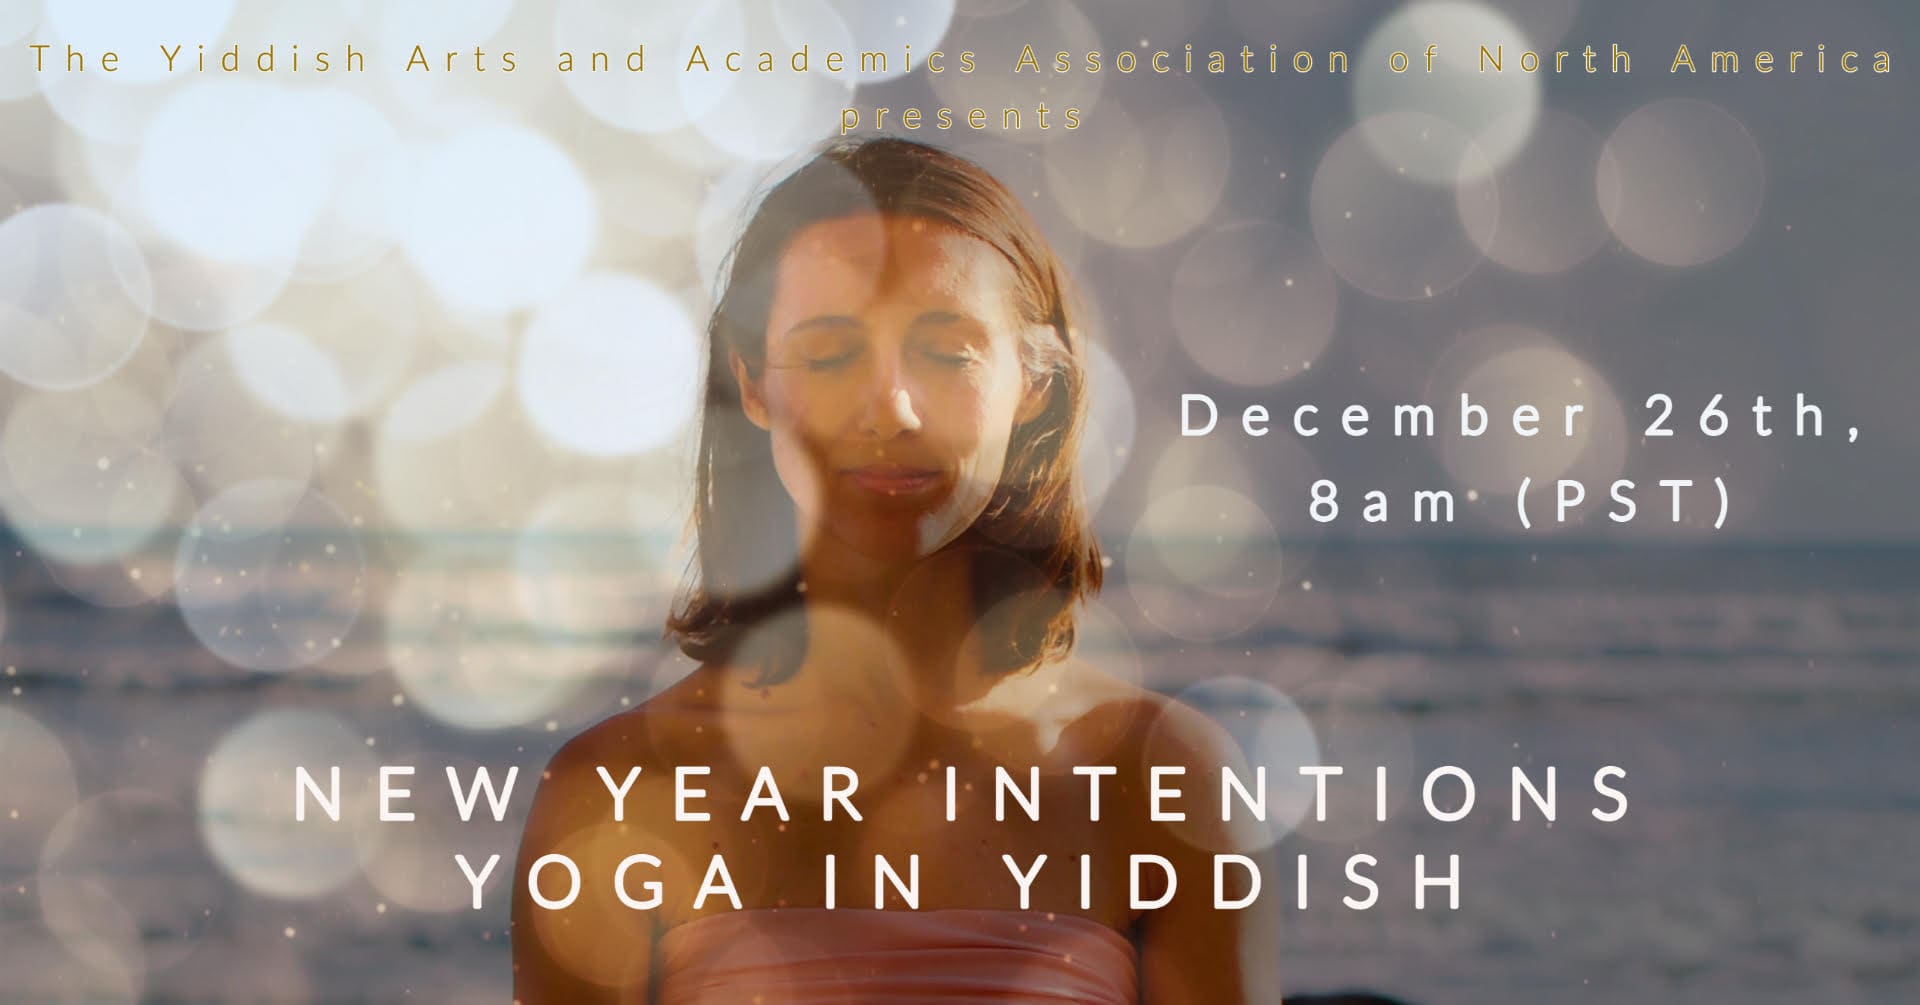 New Year Intentions With Yoga In Yiddish